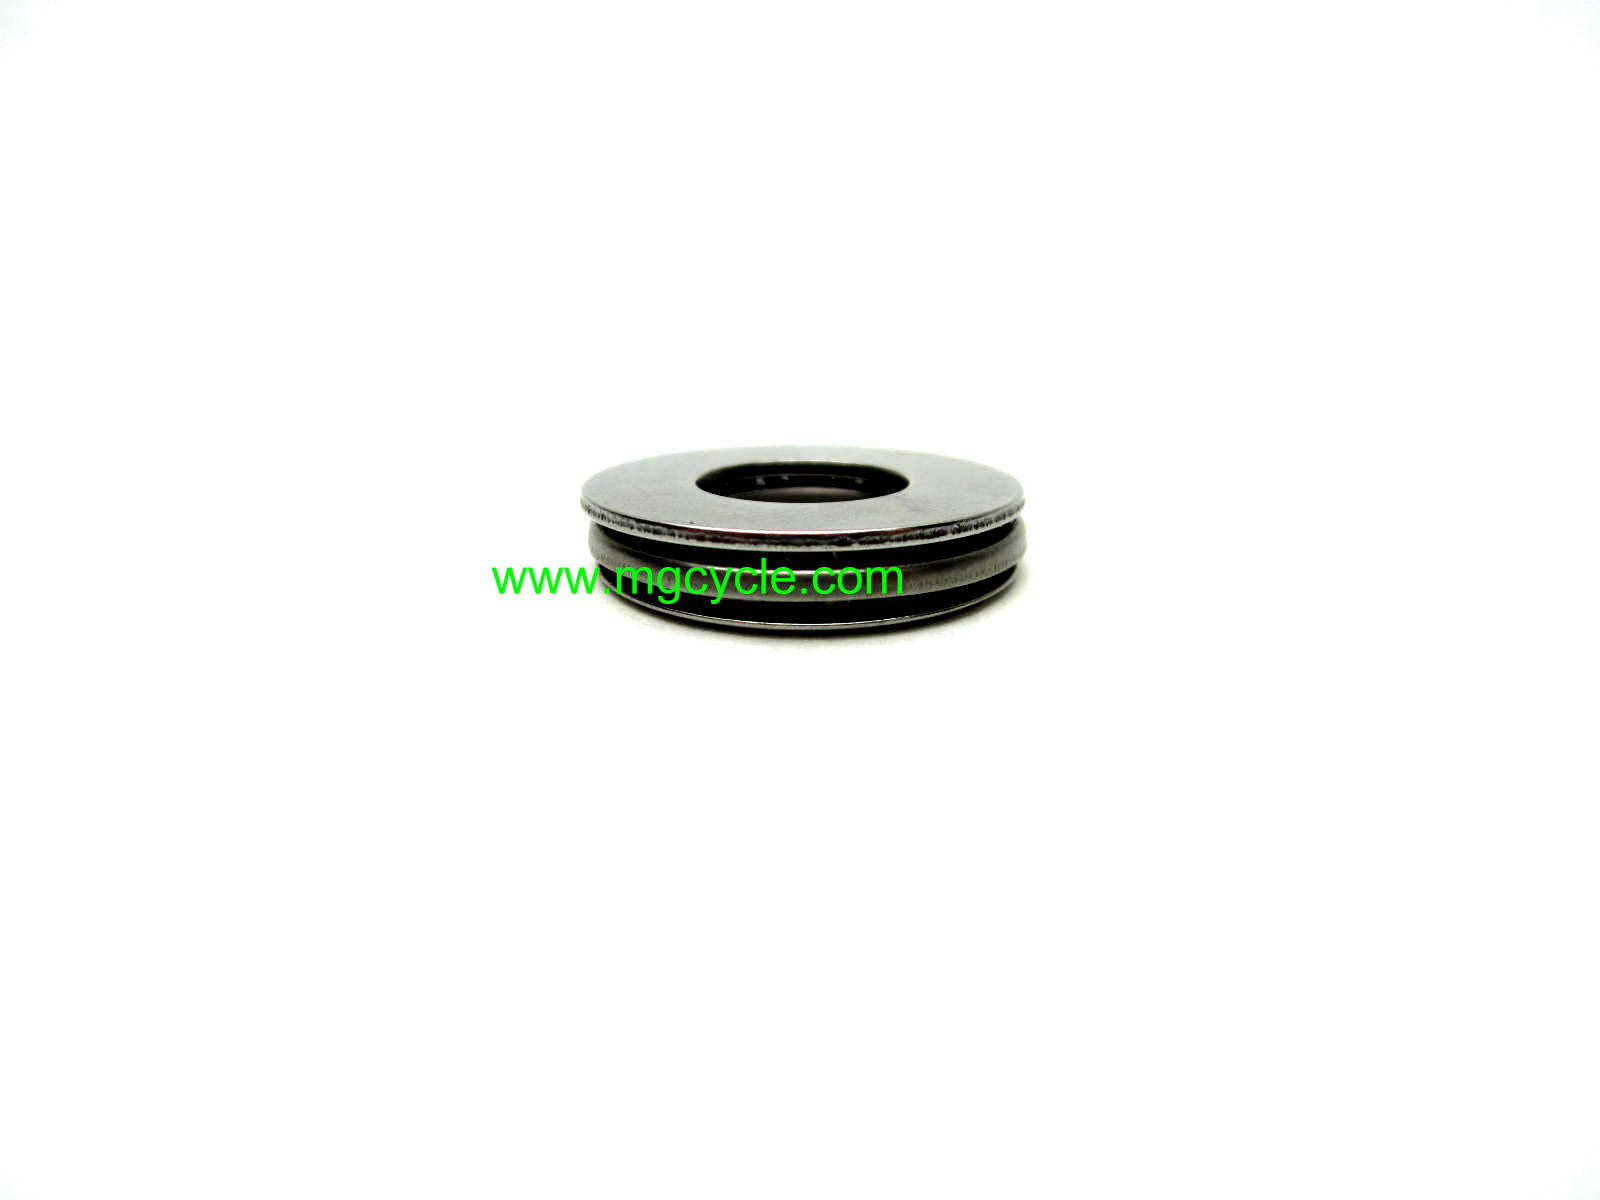 Clutch throwout bearing most 4, 5 and 6 speed trannys GU12087001 - Click Image to Close